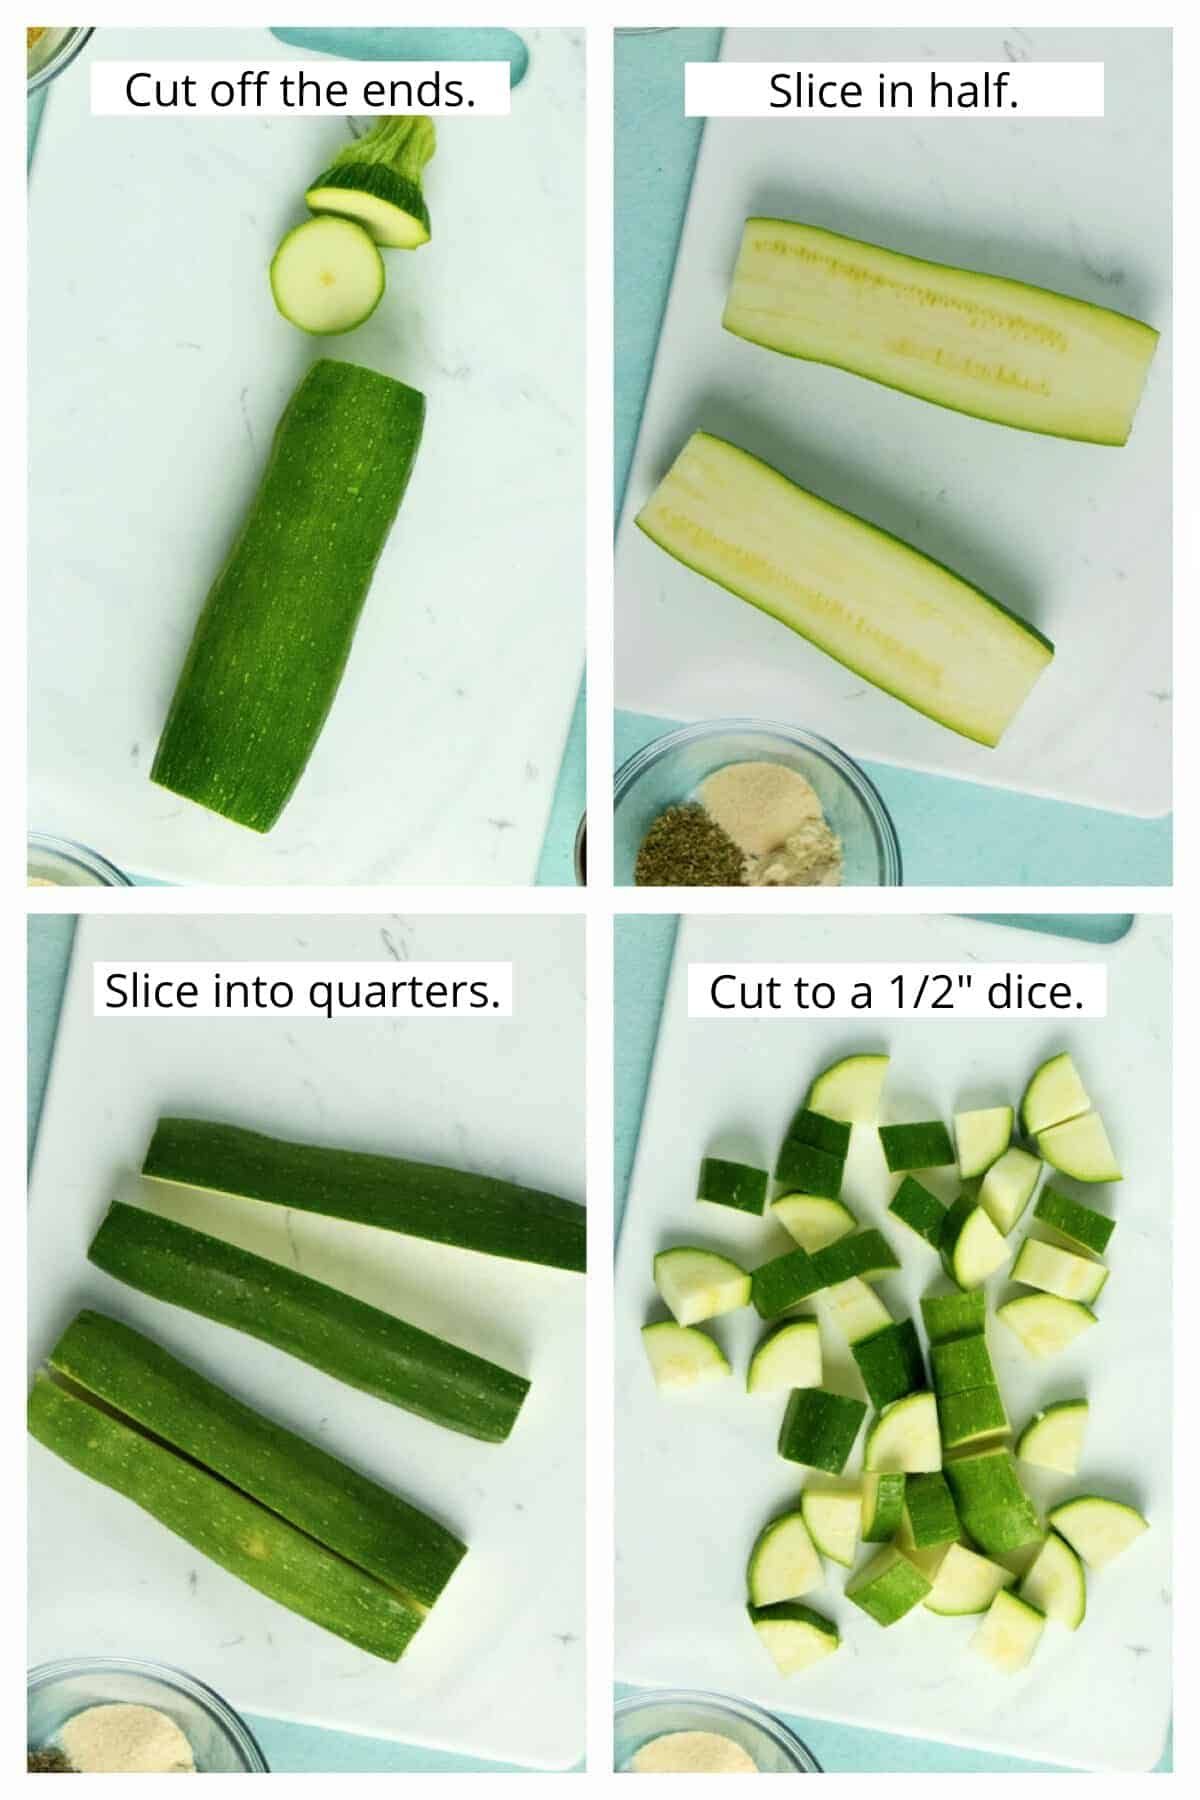 image collage with text showing cutting the ends off the zucchini, cutting it into half and then quarters, then the half-inch dice